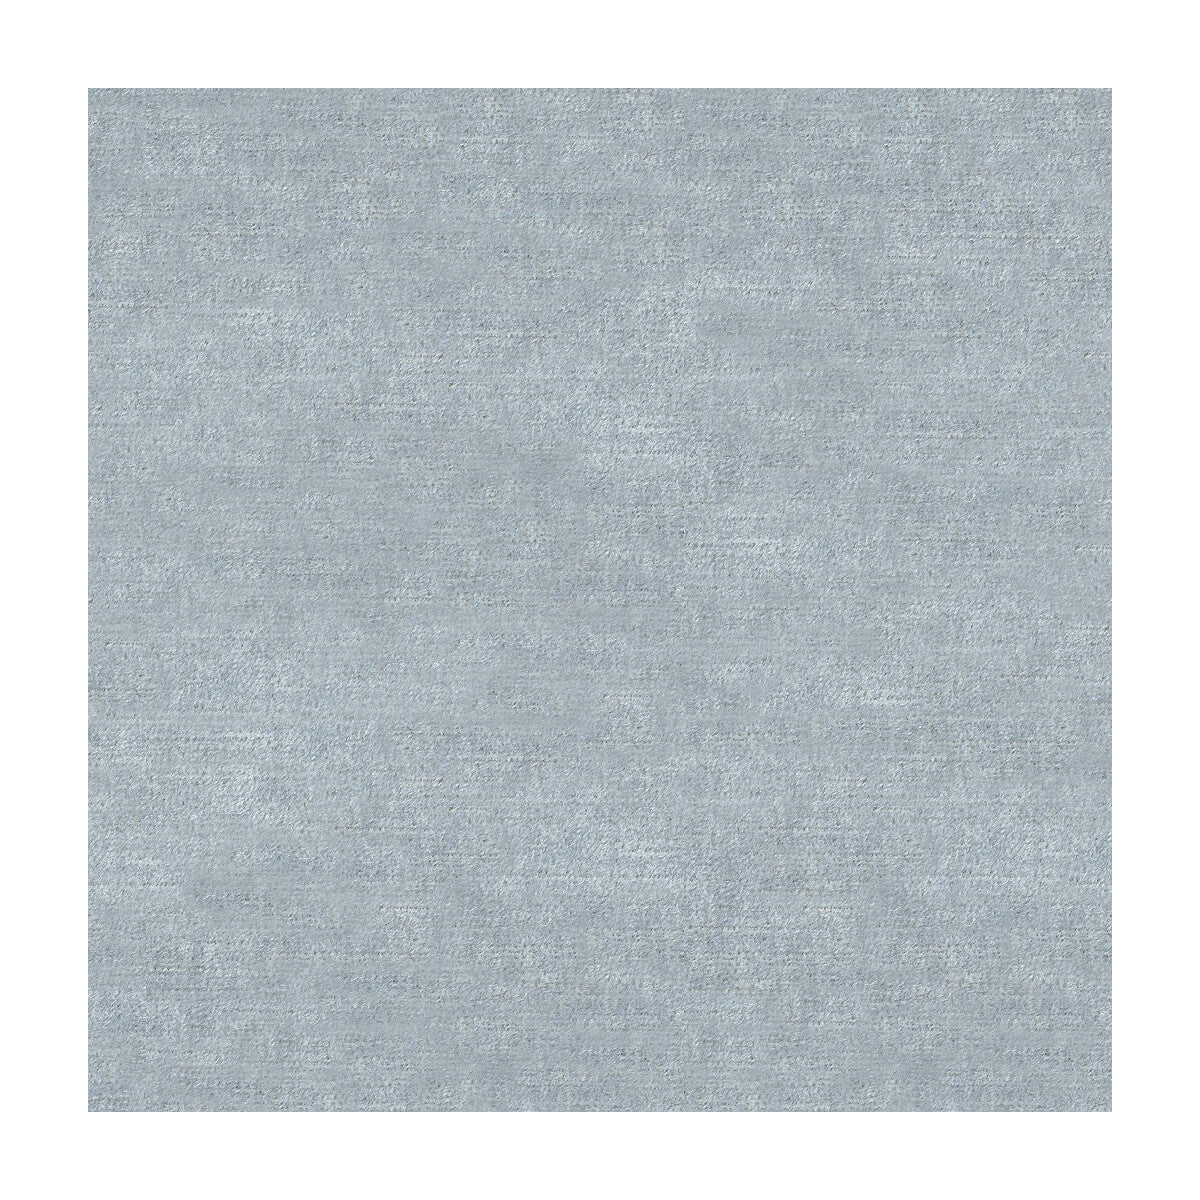 Montage fabric in dusk blue color - pattern GWF-3526.15.0 - by Lee Jofa Modern in the Kelly Wearstler III collection